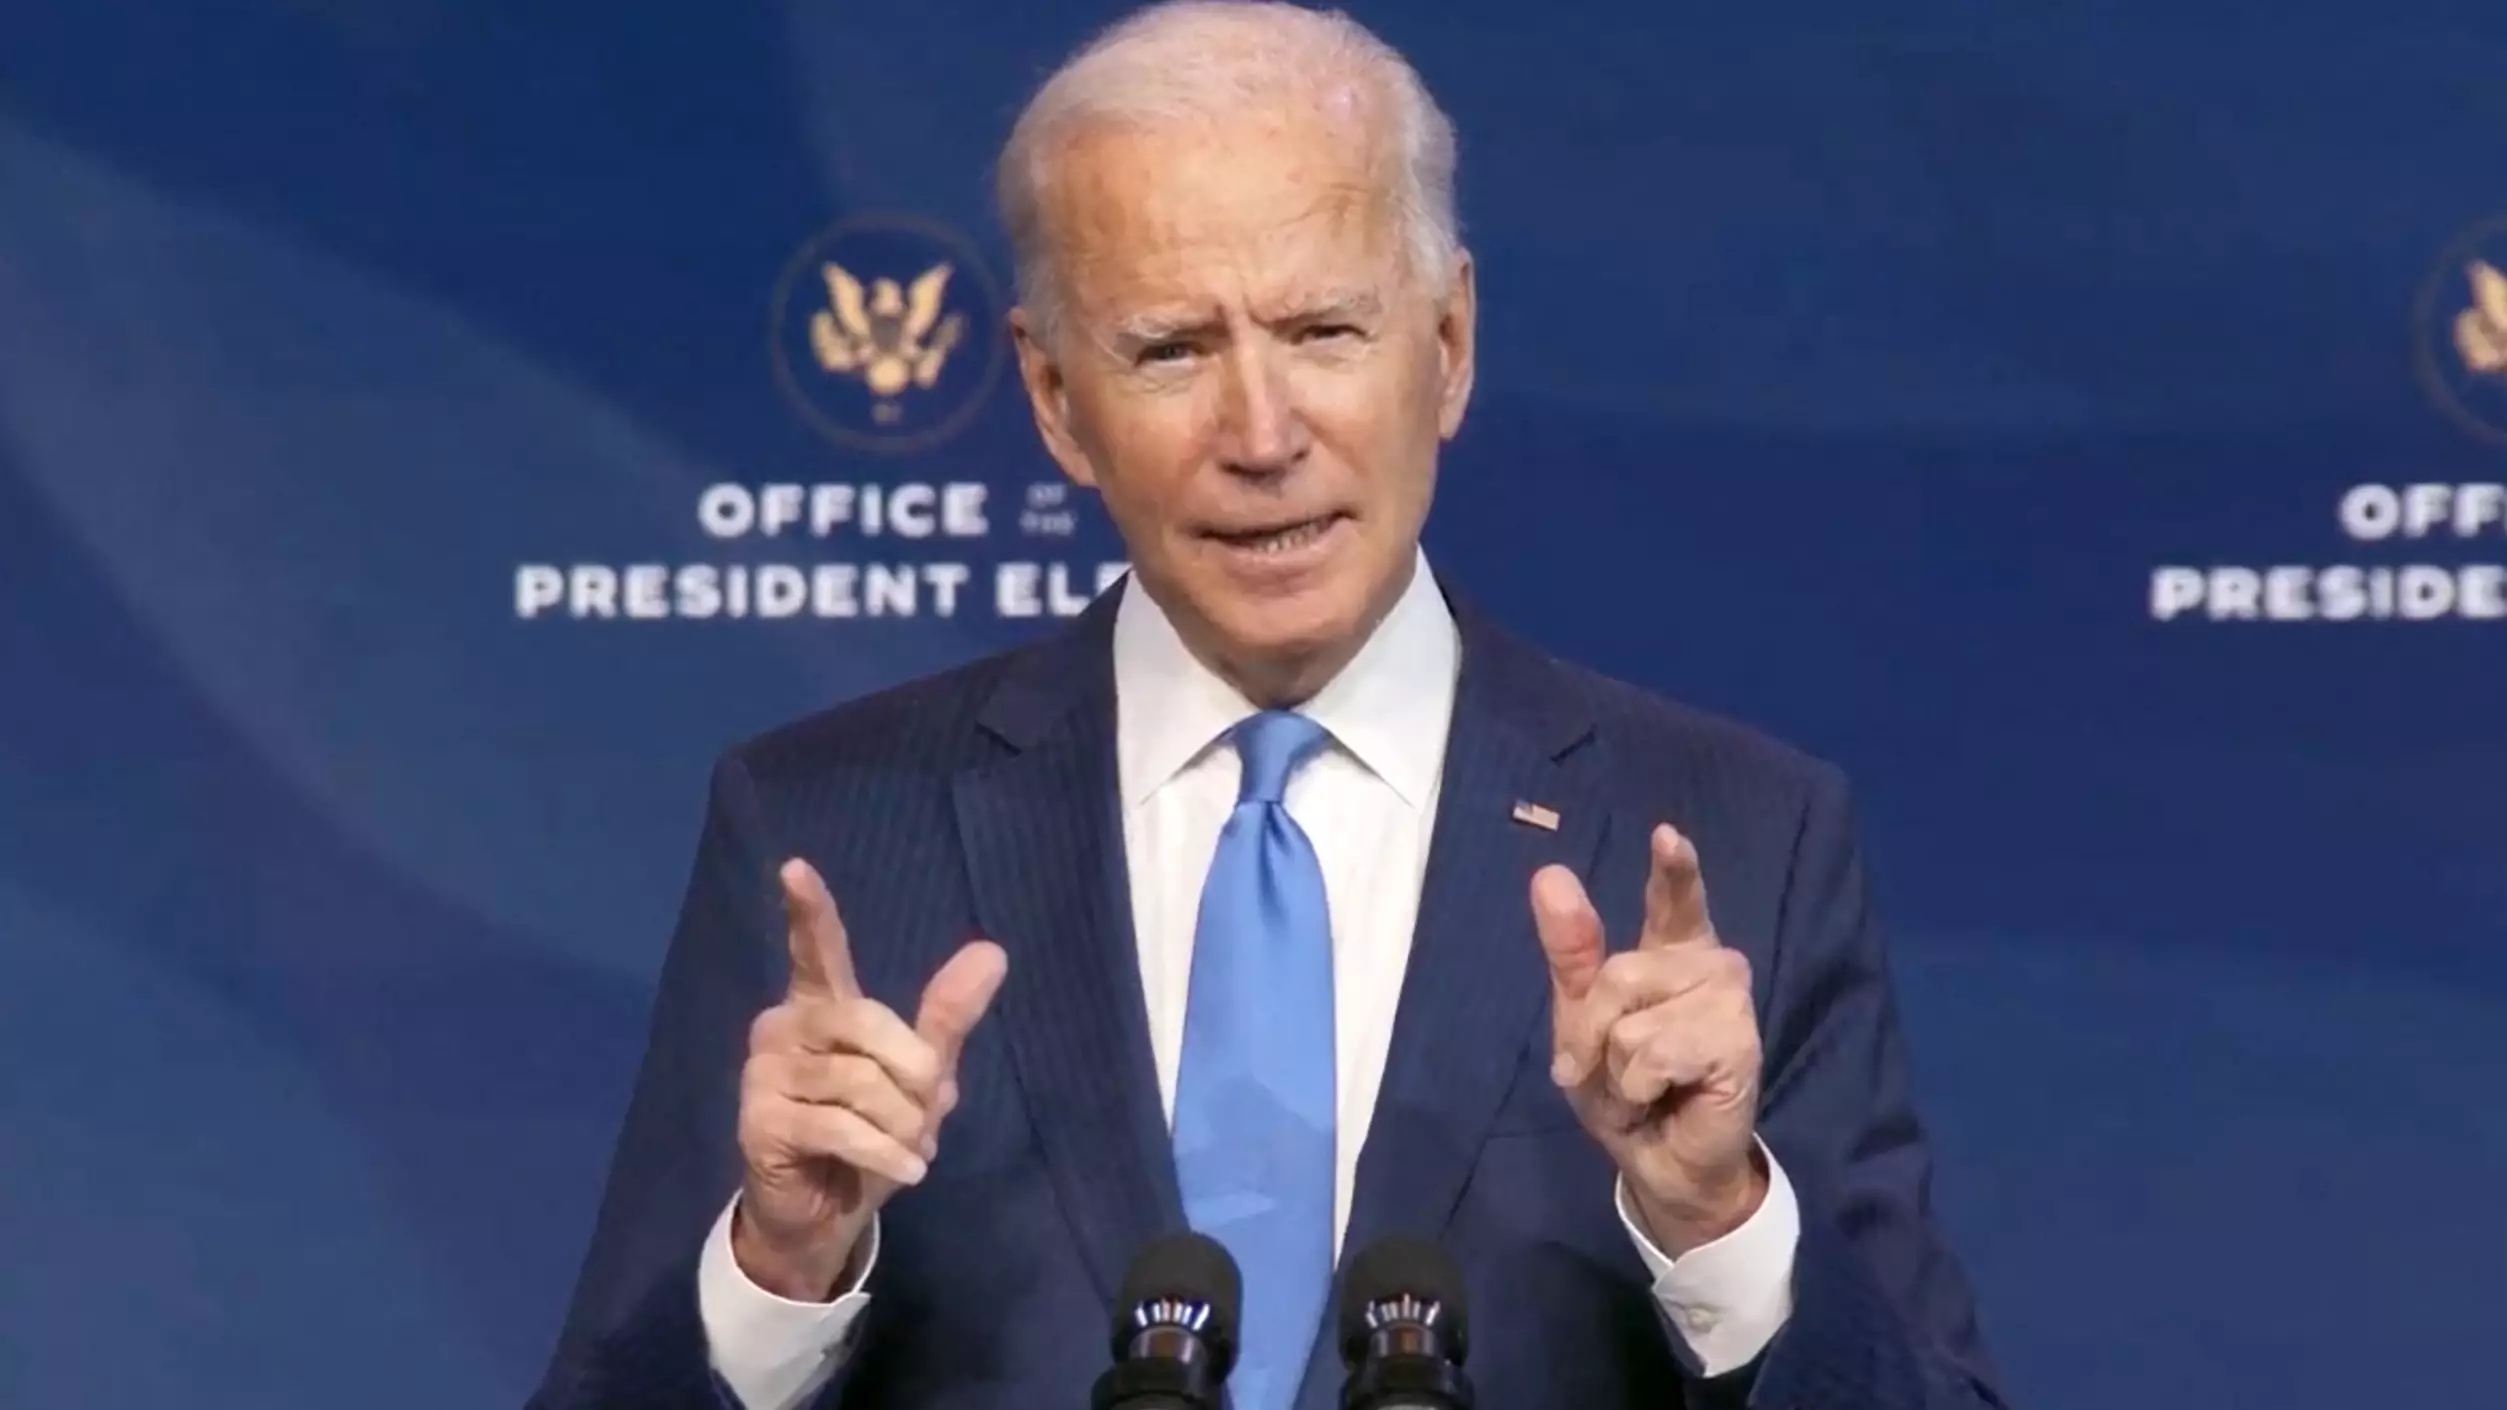 Joe Biden Says 2020 Election Should Be 'Celebrated' After Electoral College Declares Him The Winner 